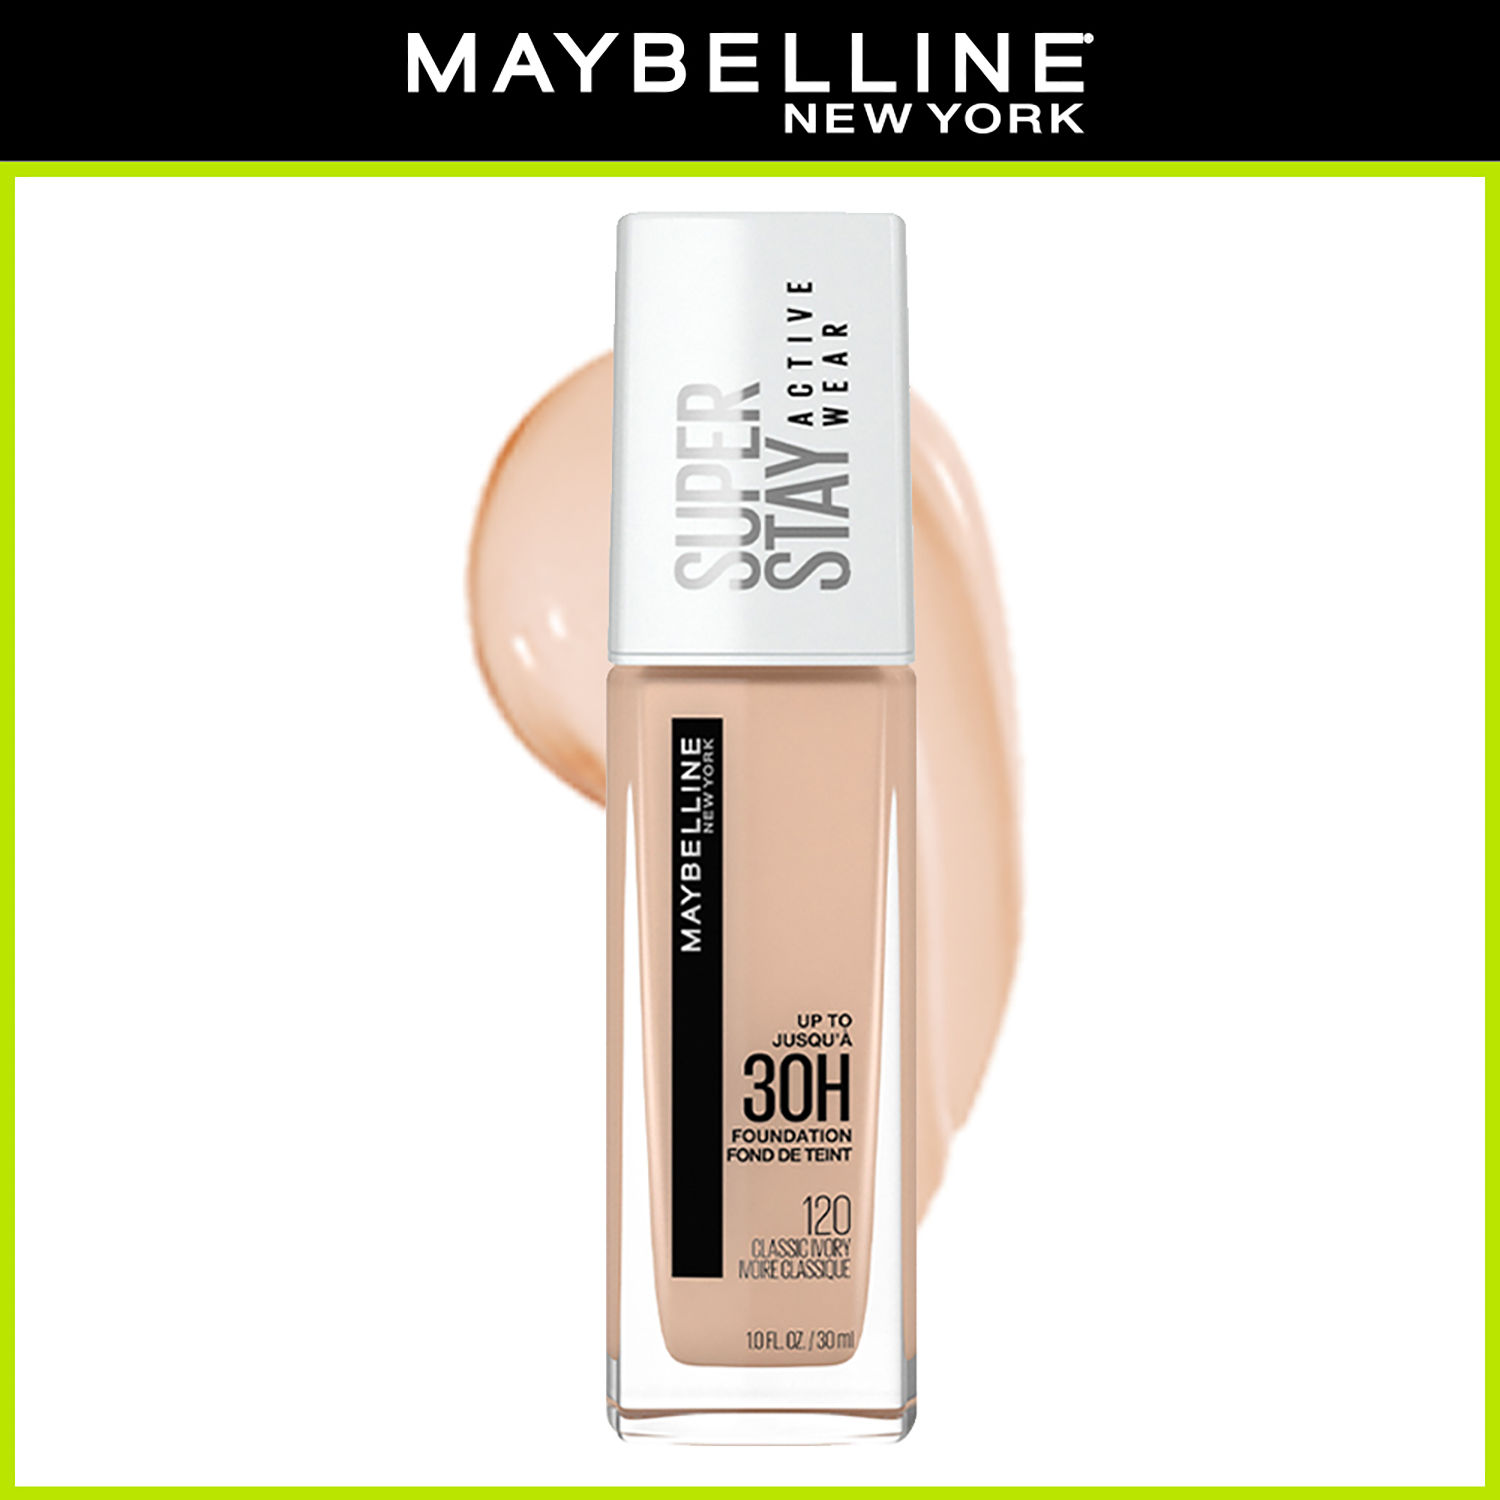 Maybelline New York Super Stay Full Coverage Active Wear Liquid Foundation,  Matte Finish with 30 HR Wear, Transfer Proof, 120, Classic Ivory, 30ml